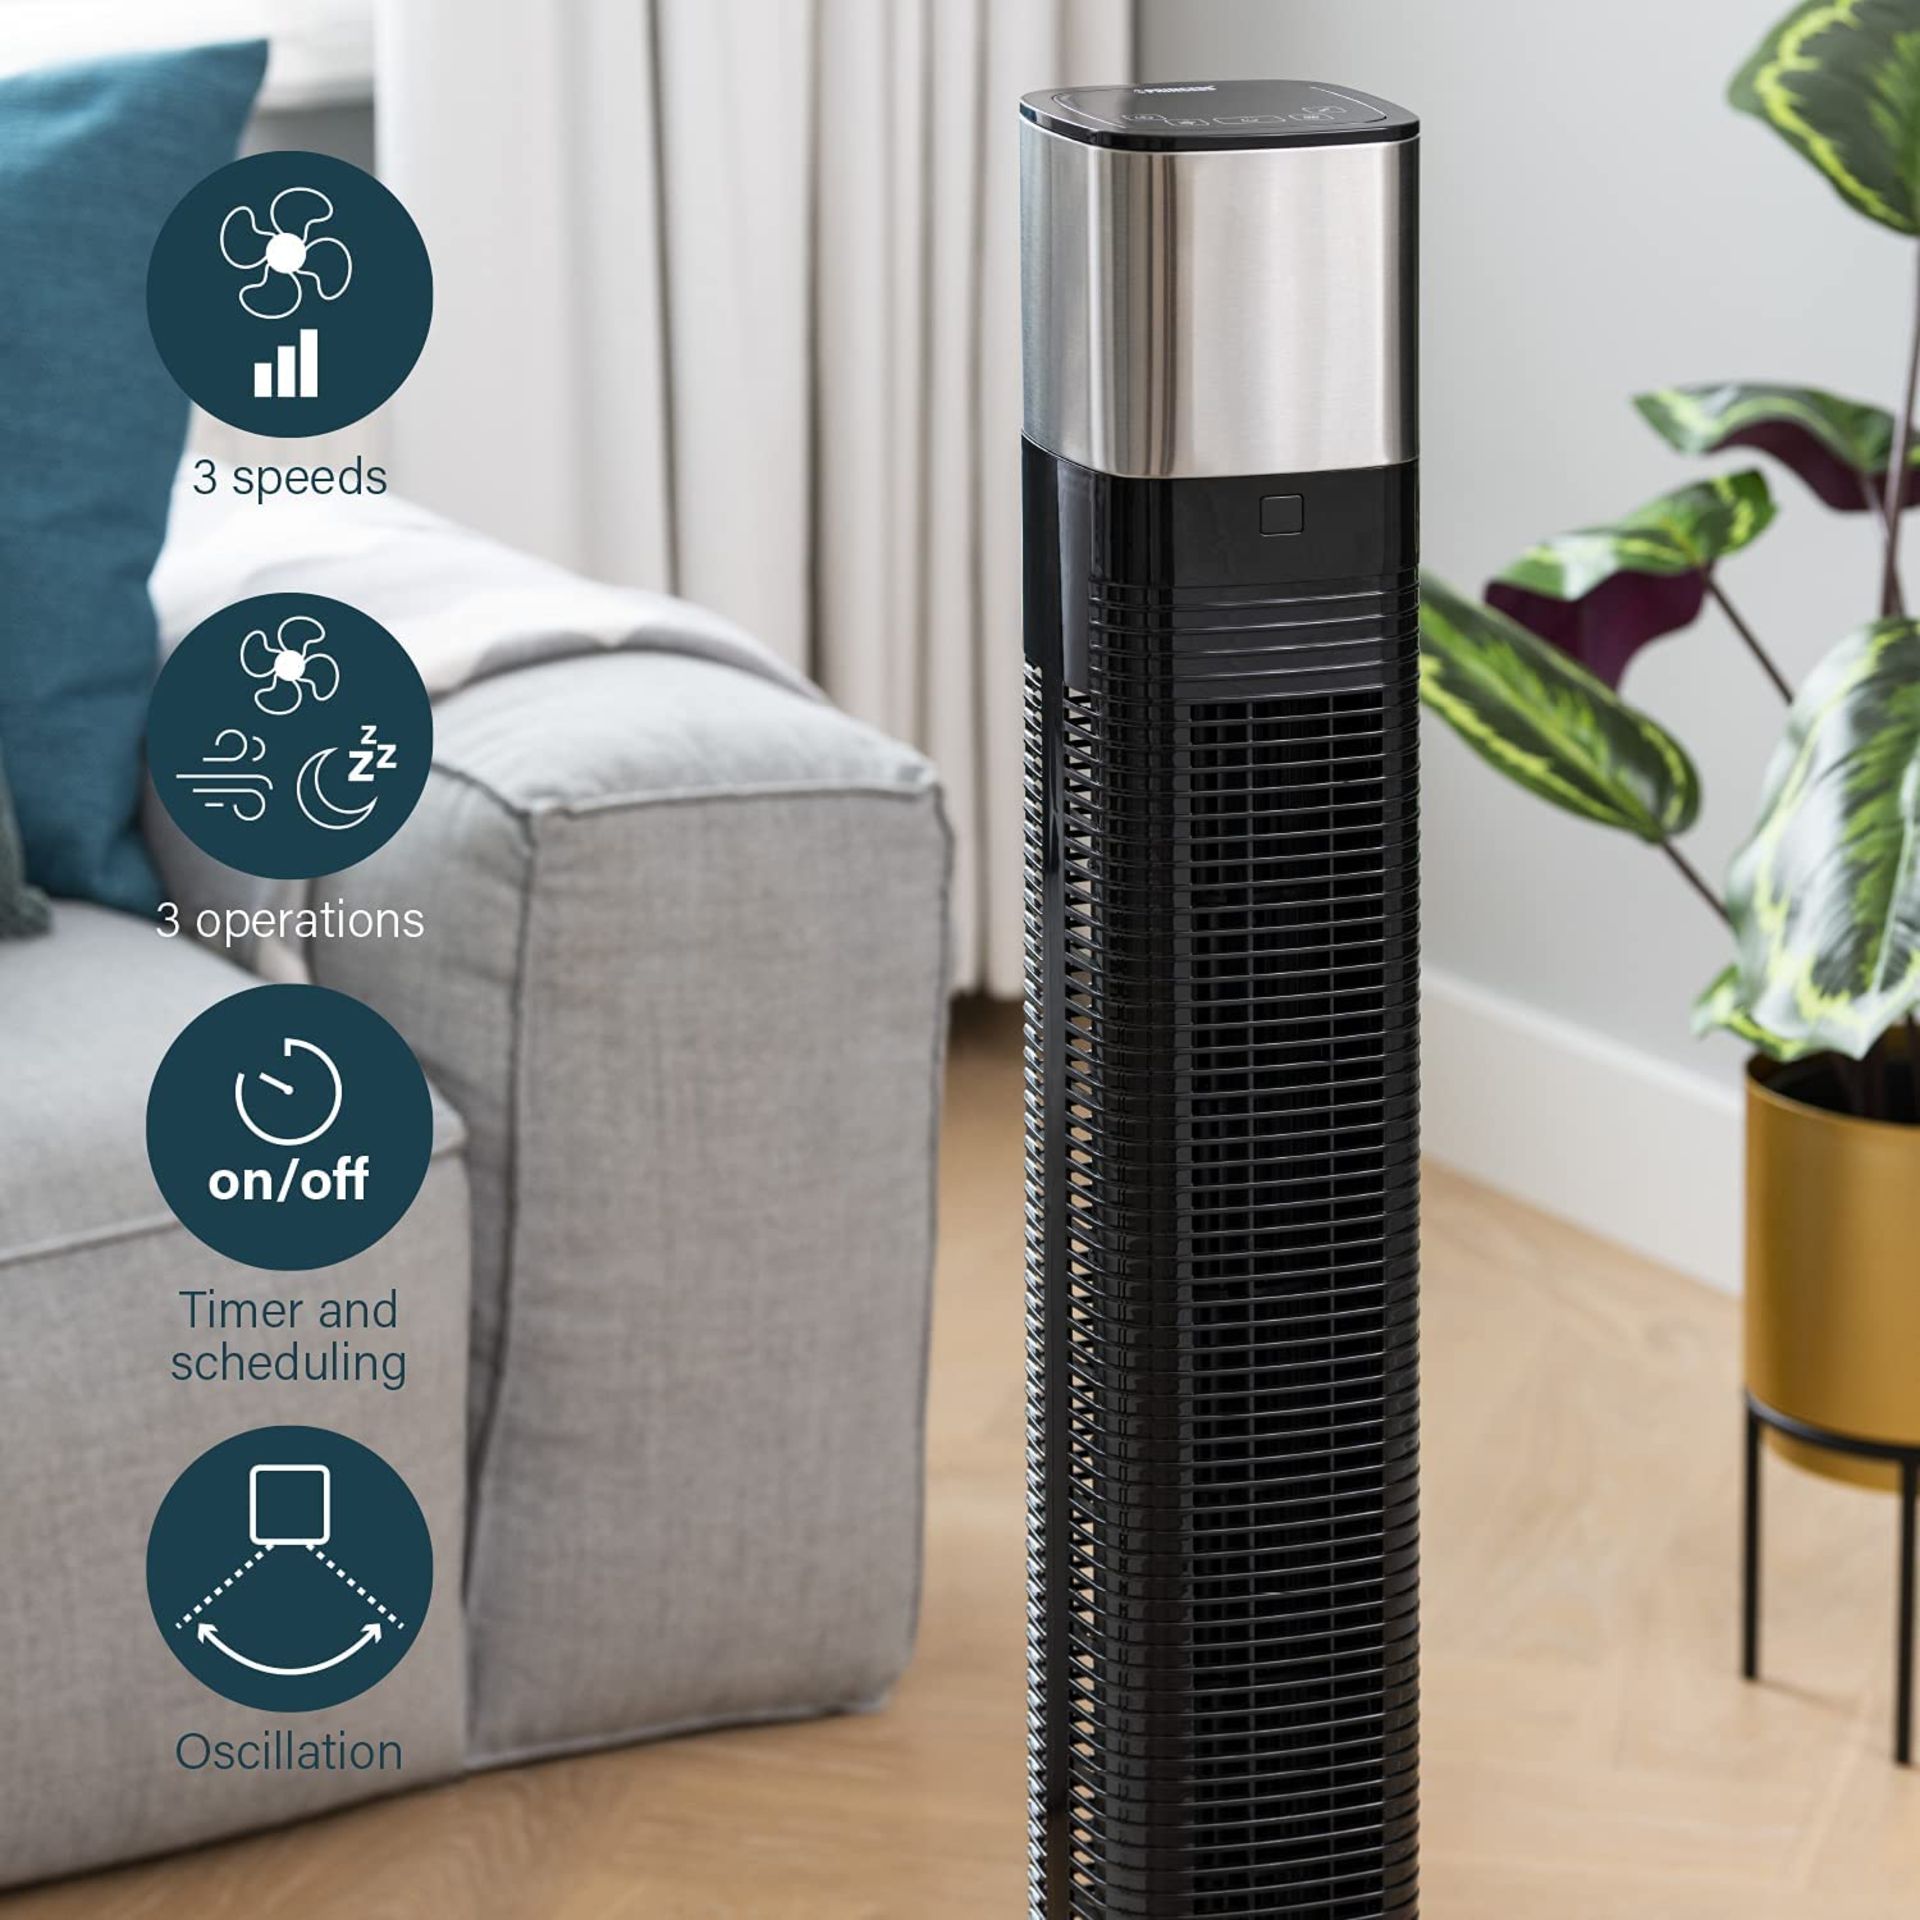 Princess Smart Tower Fan, 50 W, 3 Speed Settings, Smart Control and Free App, Works with Alexa.( - Image 2 of 3